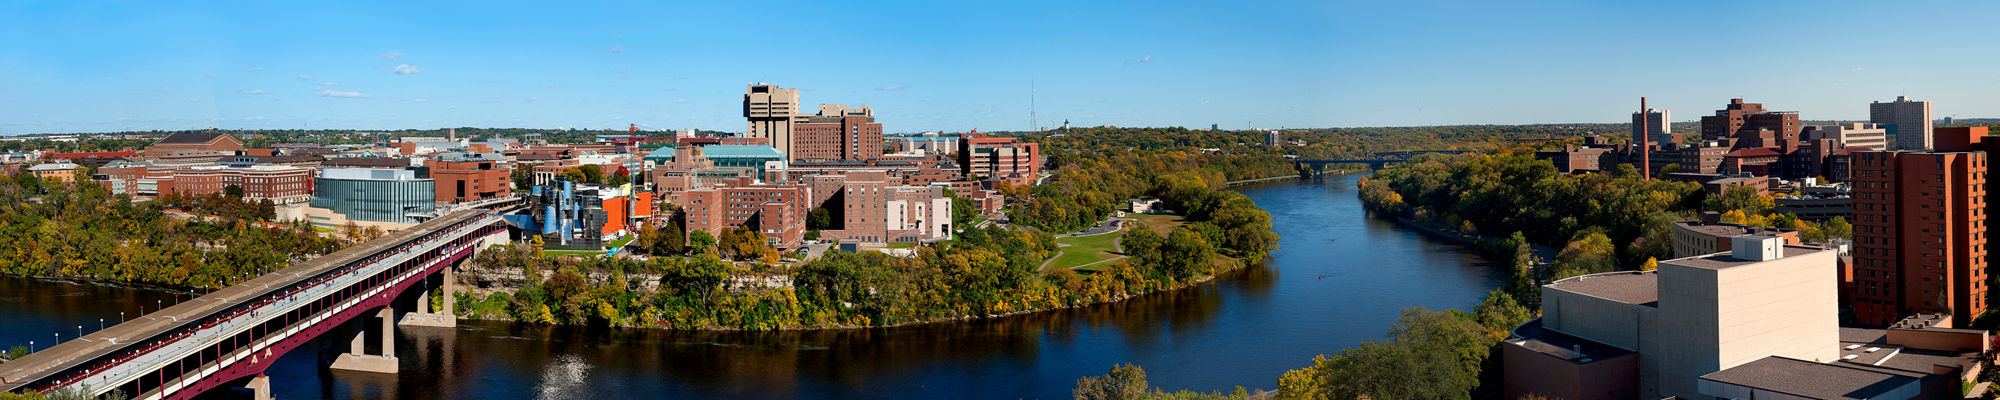 Panoramic view of East Bank over the Mississippi River